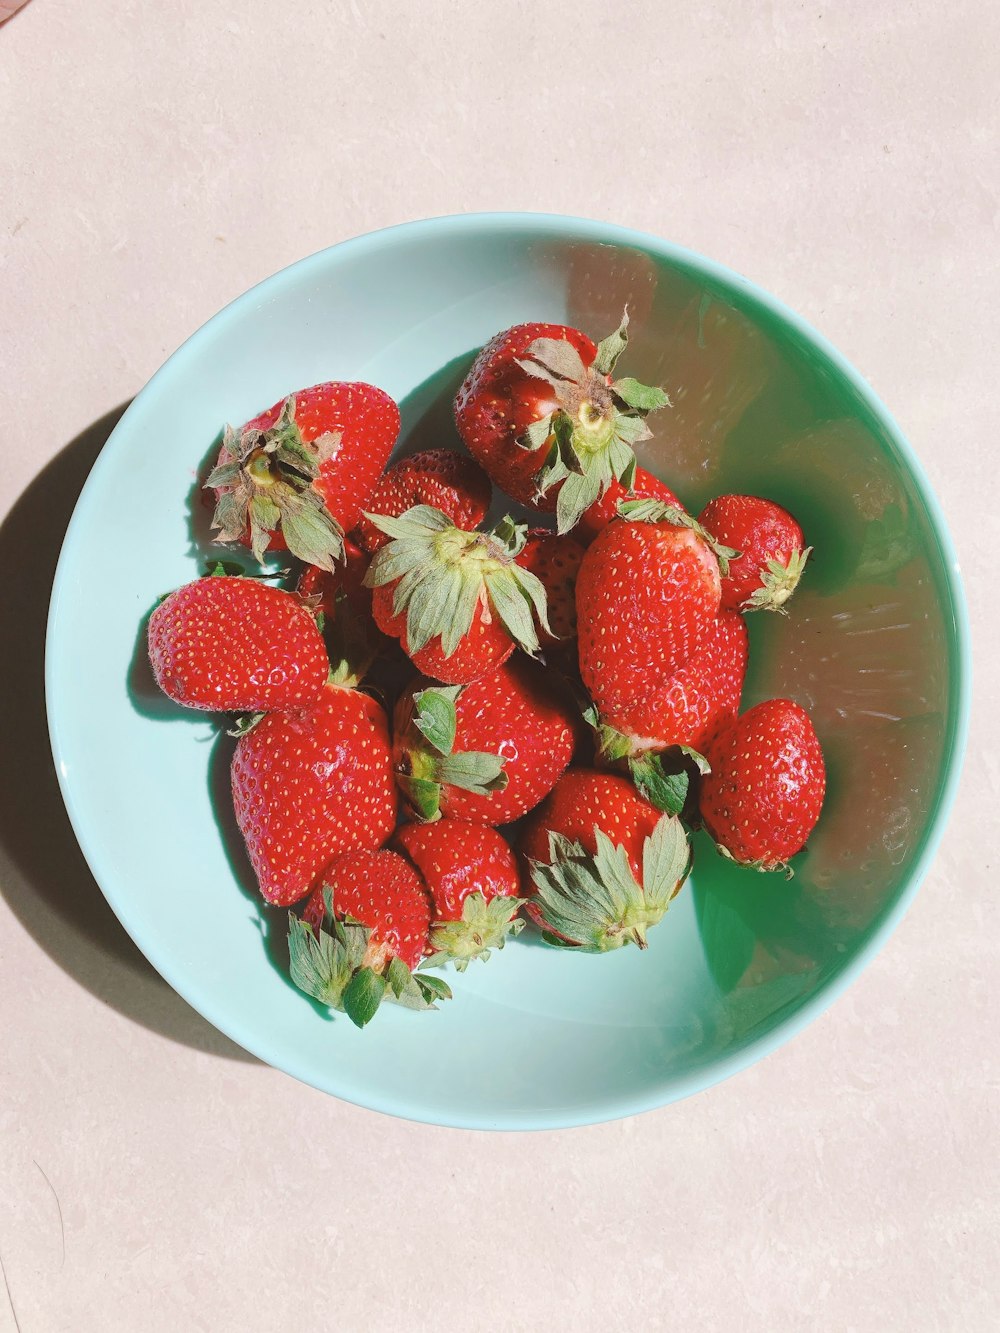 a bowl of strawberries on a table